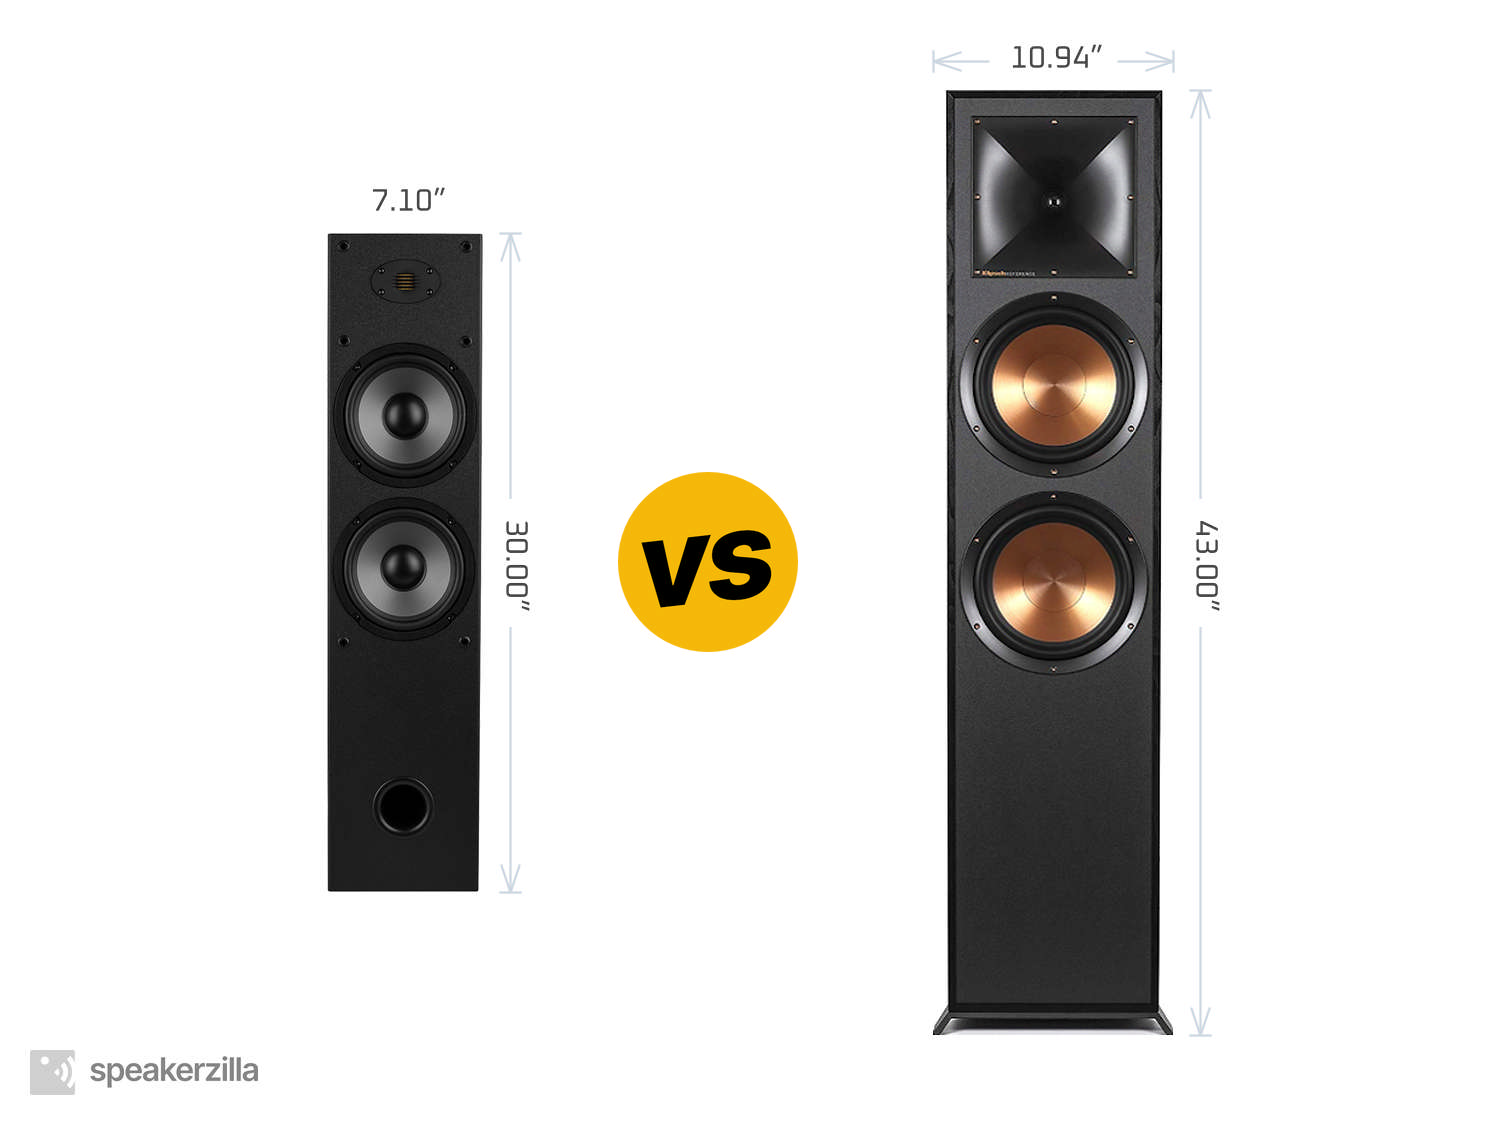 Dayton Audio T652-AIR Tower Speakers vs. Klipsch Reference R-820F Tower Speakers